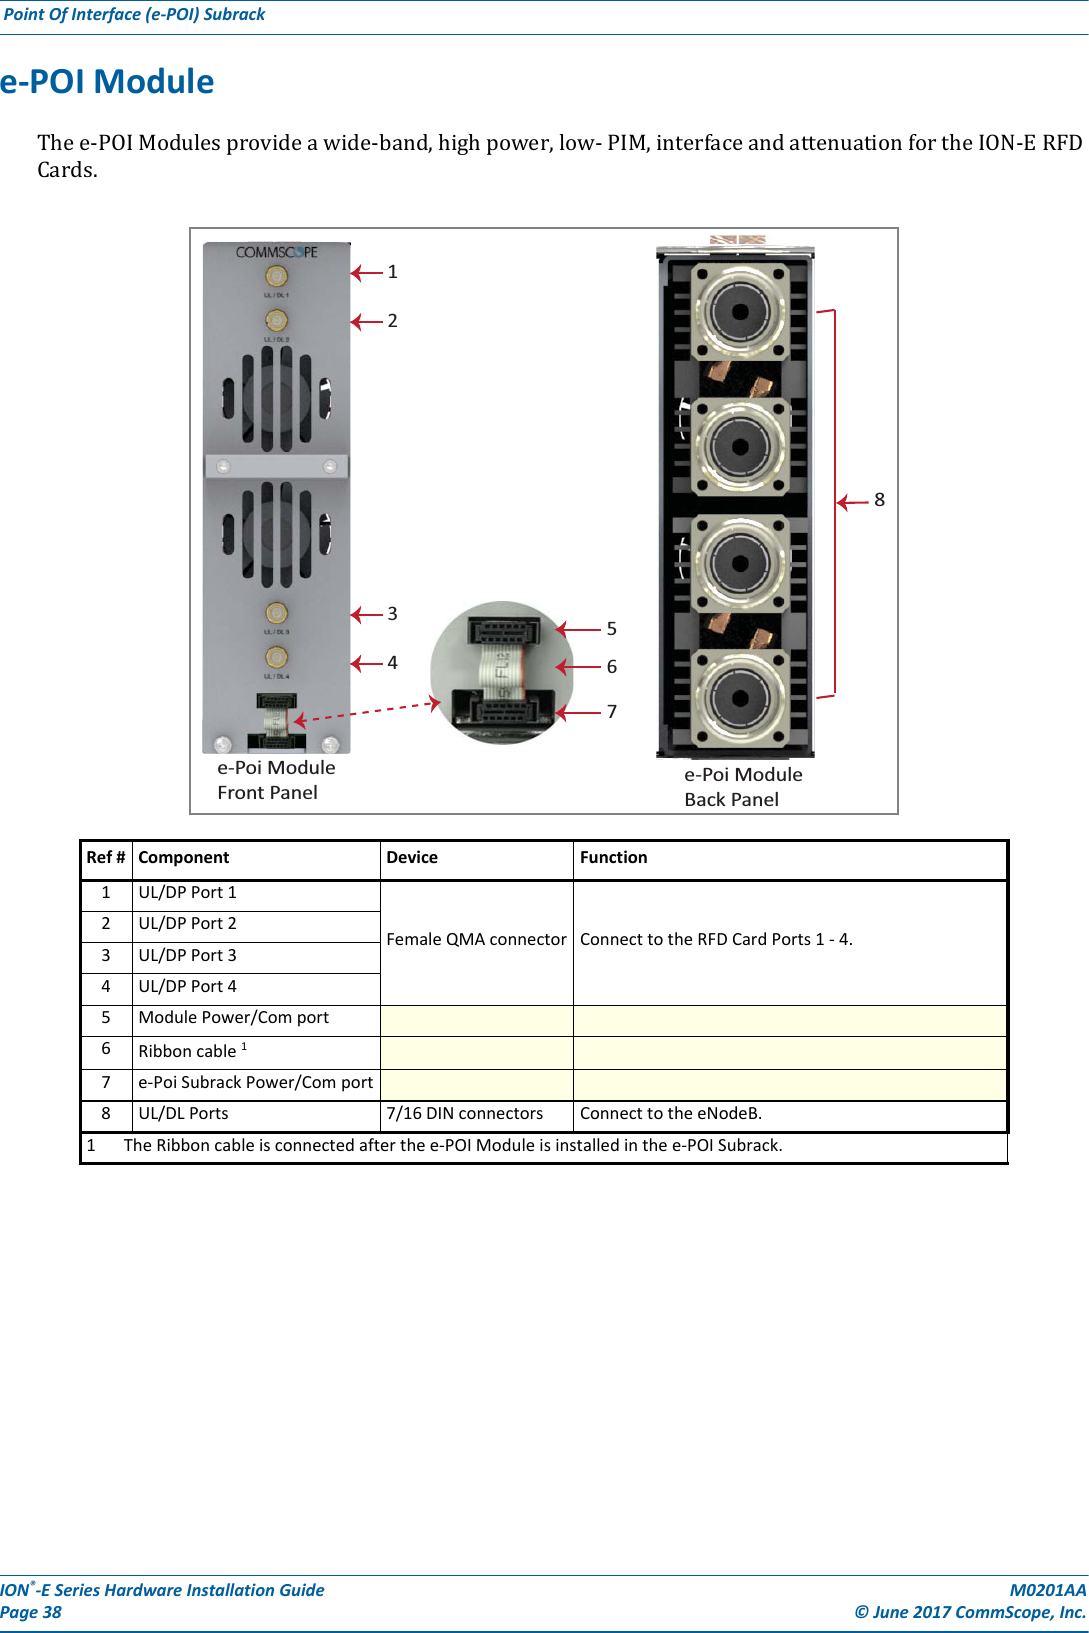 ION®-E Series Hardware Installation Guide M0201AA Page 38 © June 2017 CommScope, Inc. Point Of Interface (e-POI) Subrack  e-POI ModuleThee-POIModulesprovideawide-band,highpower,low-PIM,interfaceandattenuationfortheION-ERFDCards.Ref # Component Device Function1UL/DP Port 1Female QMA connector Connect to the RFD Card Ports 1 - 4.2UL/DP Port 23UL/DP Port 34UL/DP Port 45Module Power/Com port6Ribbon cable 1 7e-Poi Subrack Power/Com port8UL/DL Ports 7/16 DIN connectors Connect to the eNodeB.1 The Ribbon cable is connected after the e-POI Module is installed in the e-POI Subrack.8e-Poi ModuleBack Panele-Poi ModuleFront Panel1234567